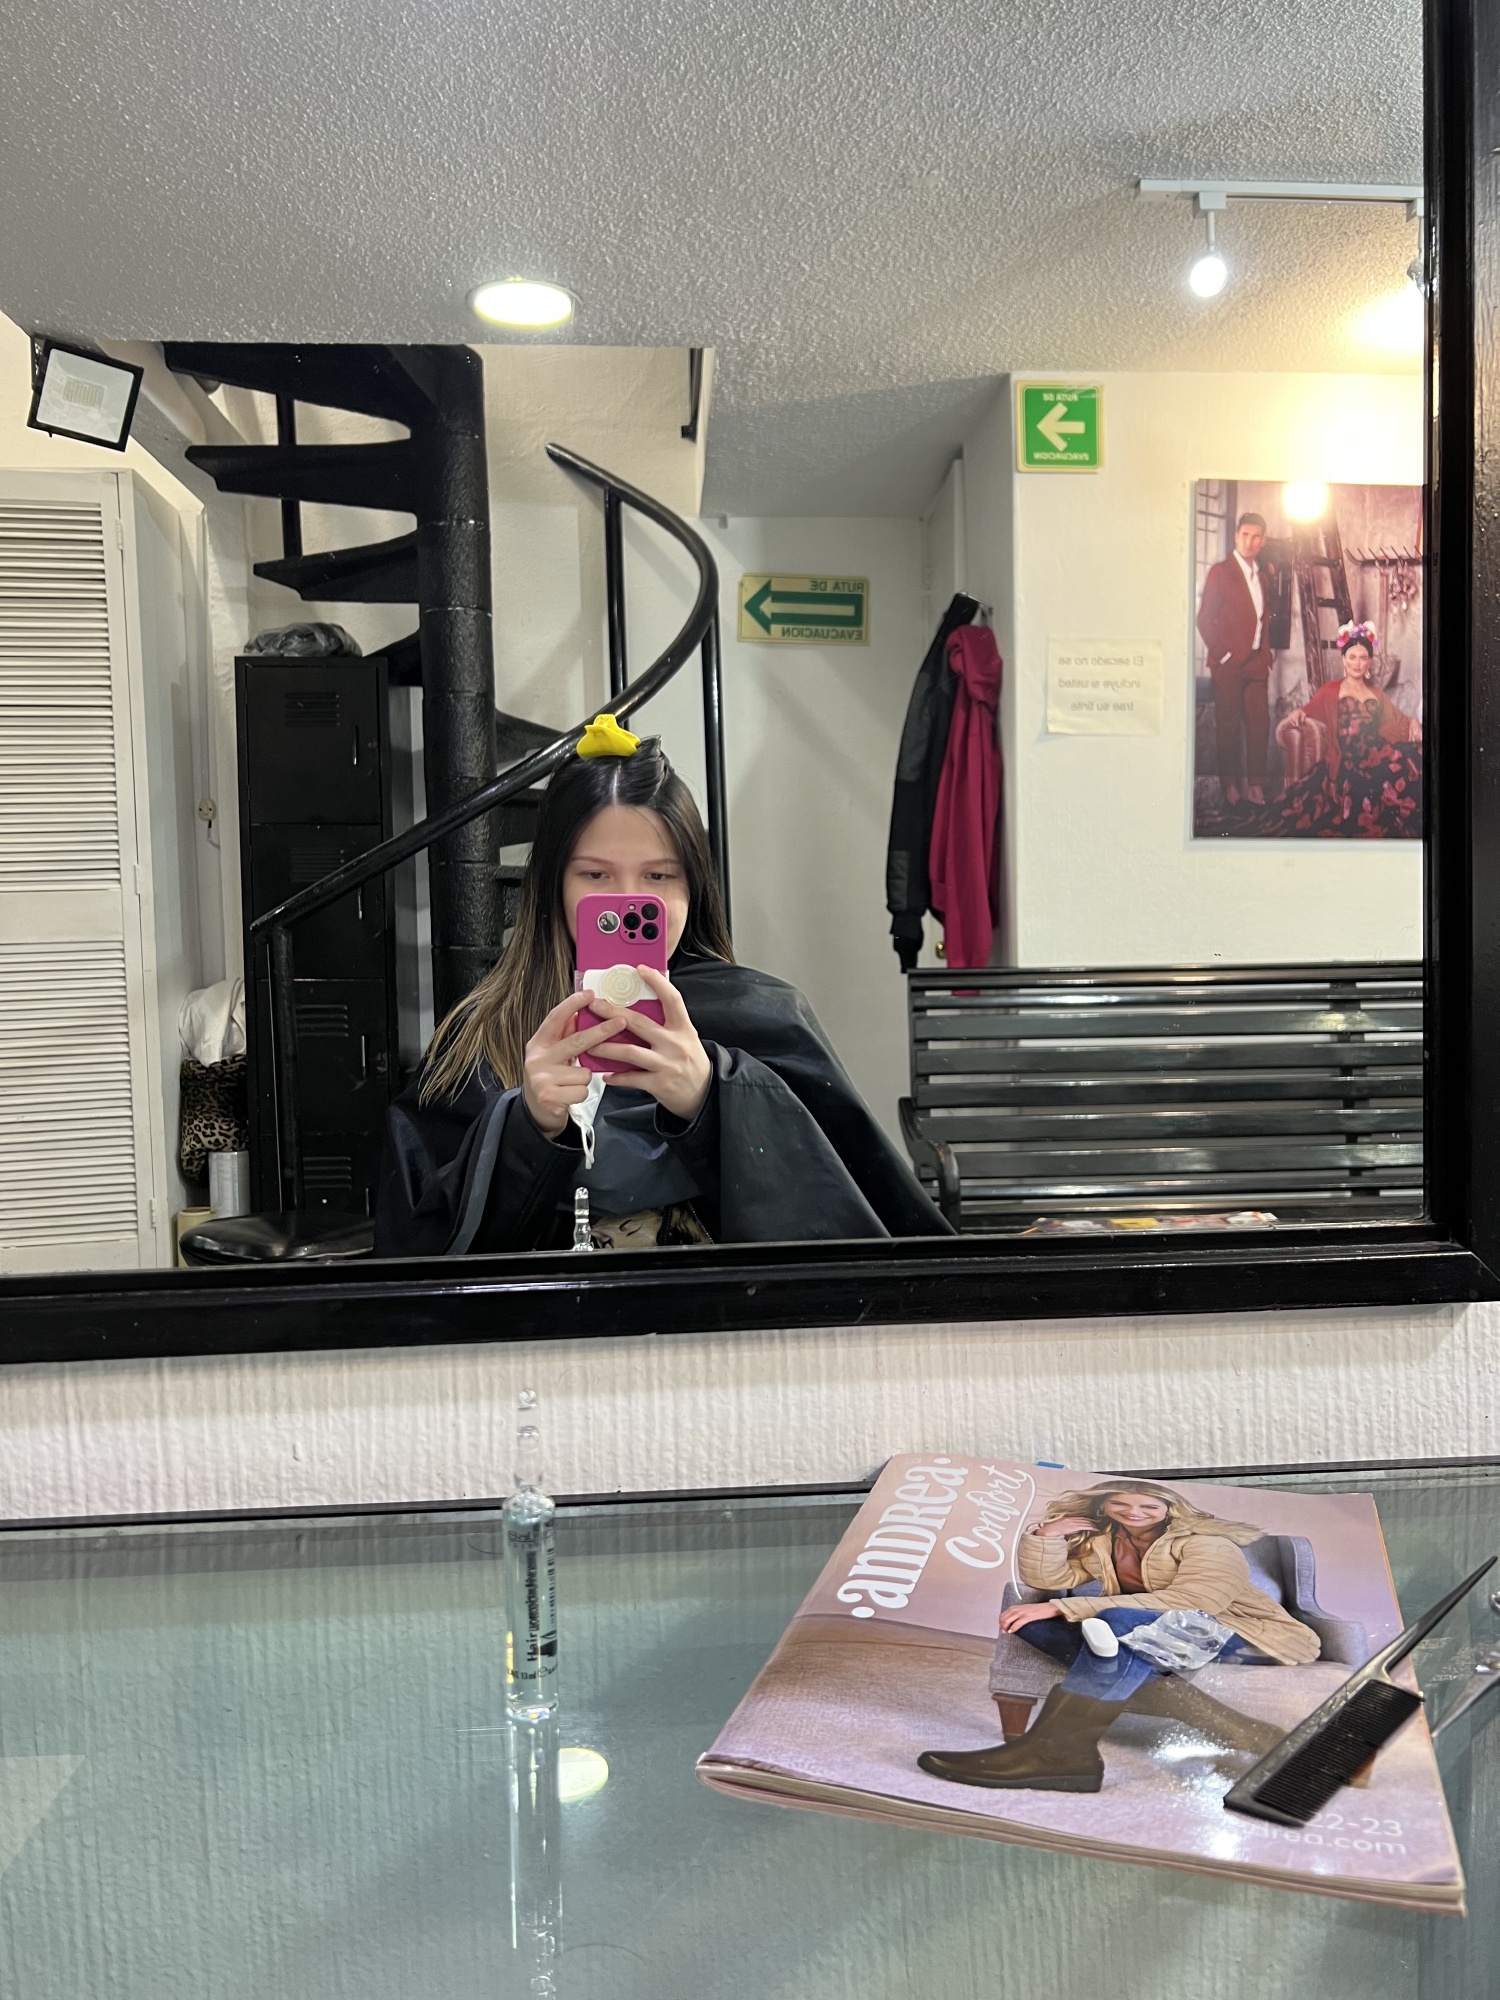 Waking up early looking for anywhere to get my haircut. Entered an empty mall and thankfully there were Mexican aunties willing to cut my hair. :D